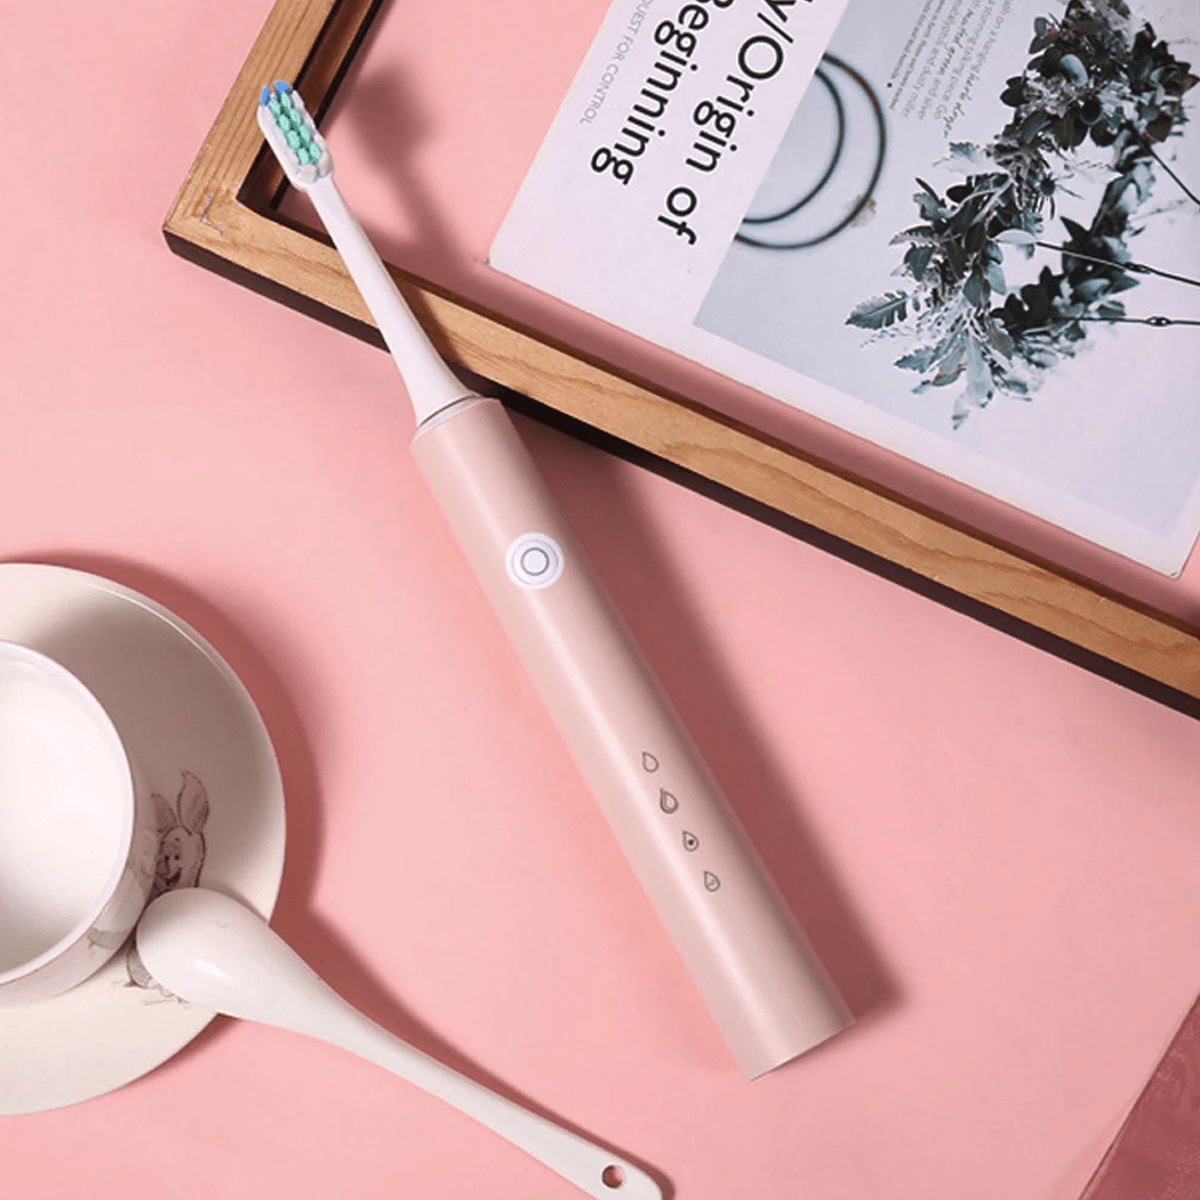 T-01 Sonic Electric Toothbrush